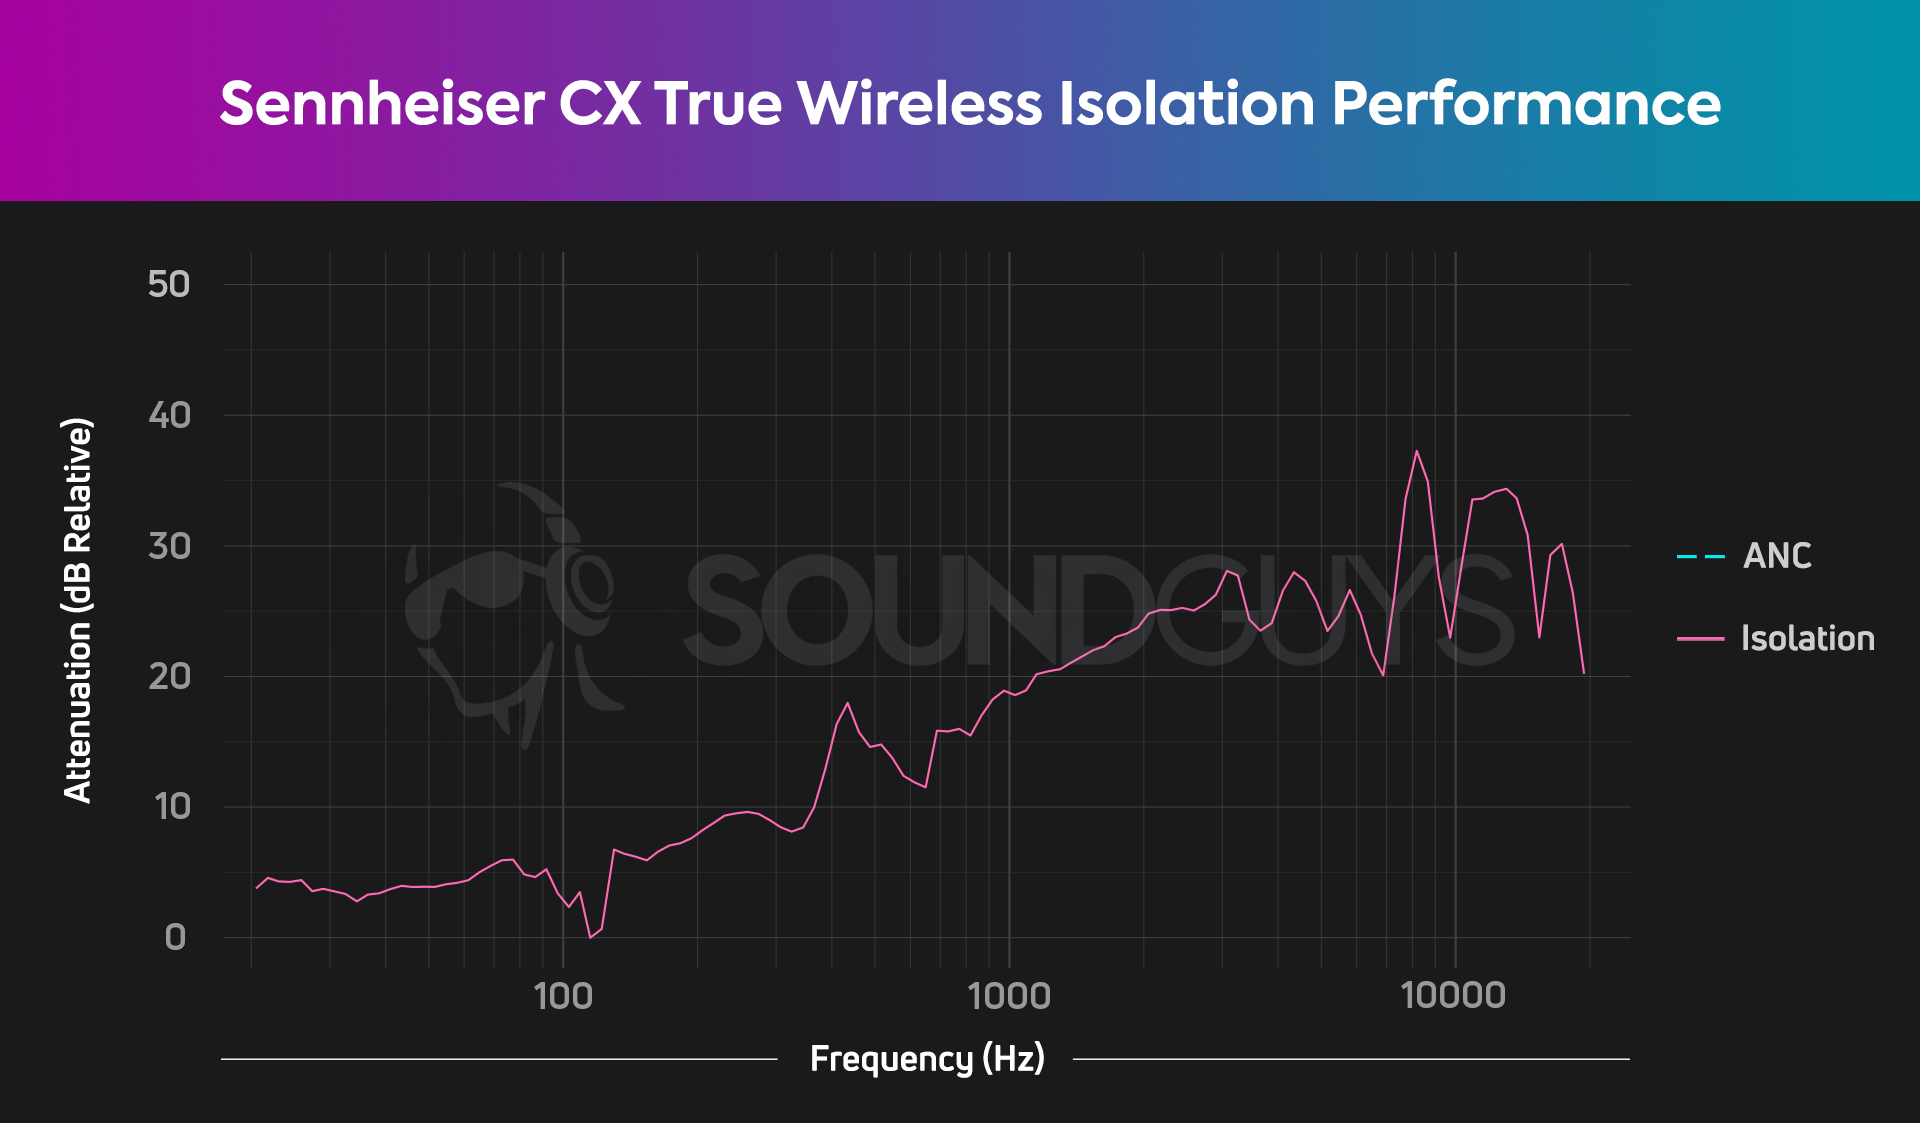 An isolation chart for the Sennheiser CX True Wireless earbuds, which shows very good isolation in the mid range.